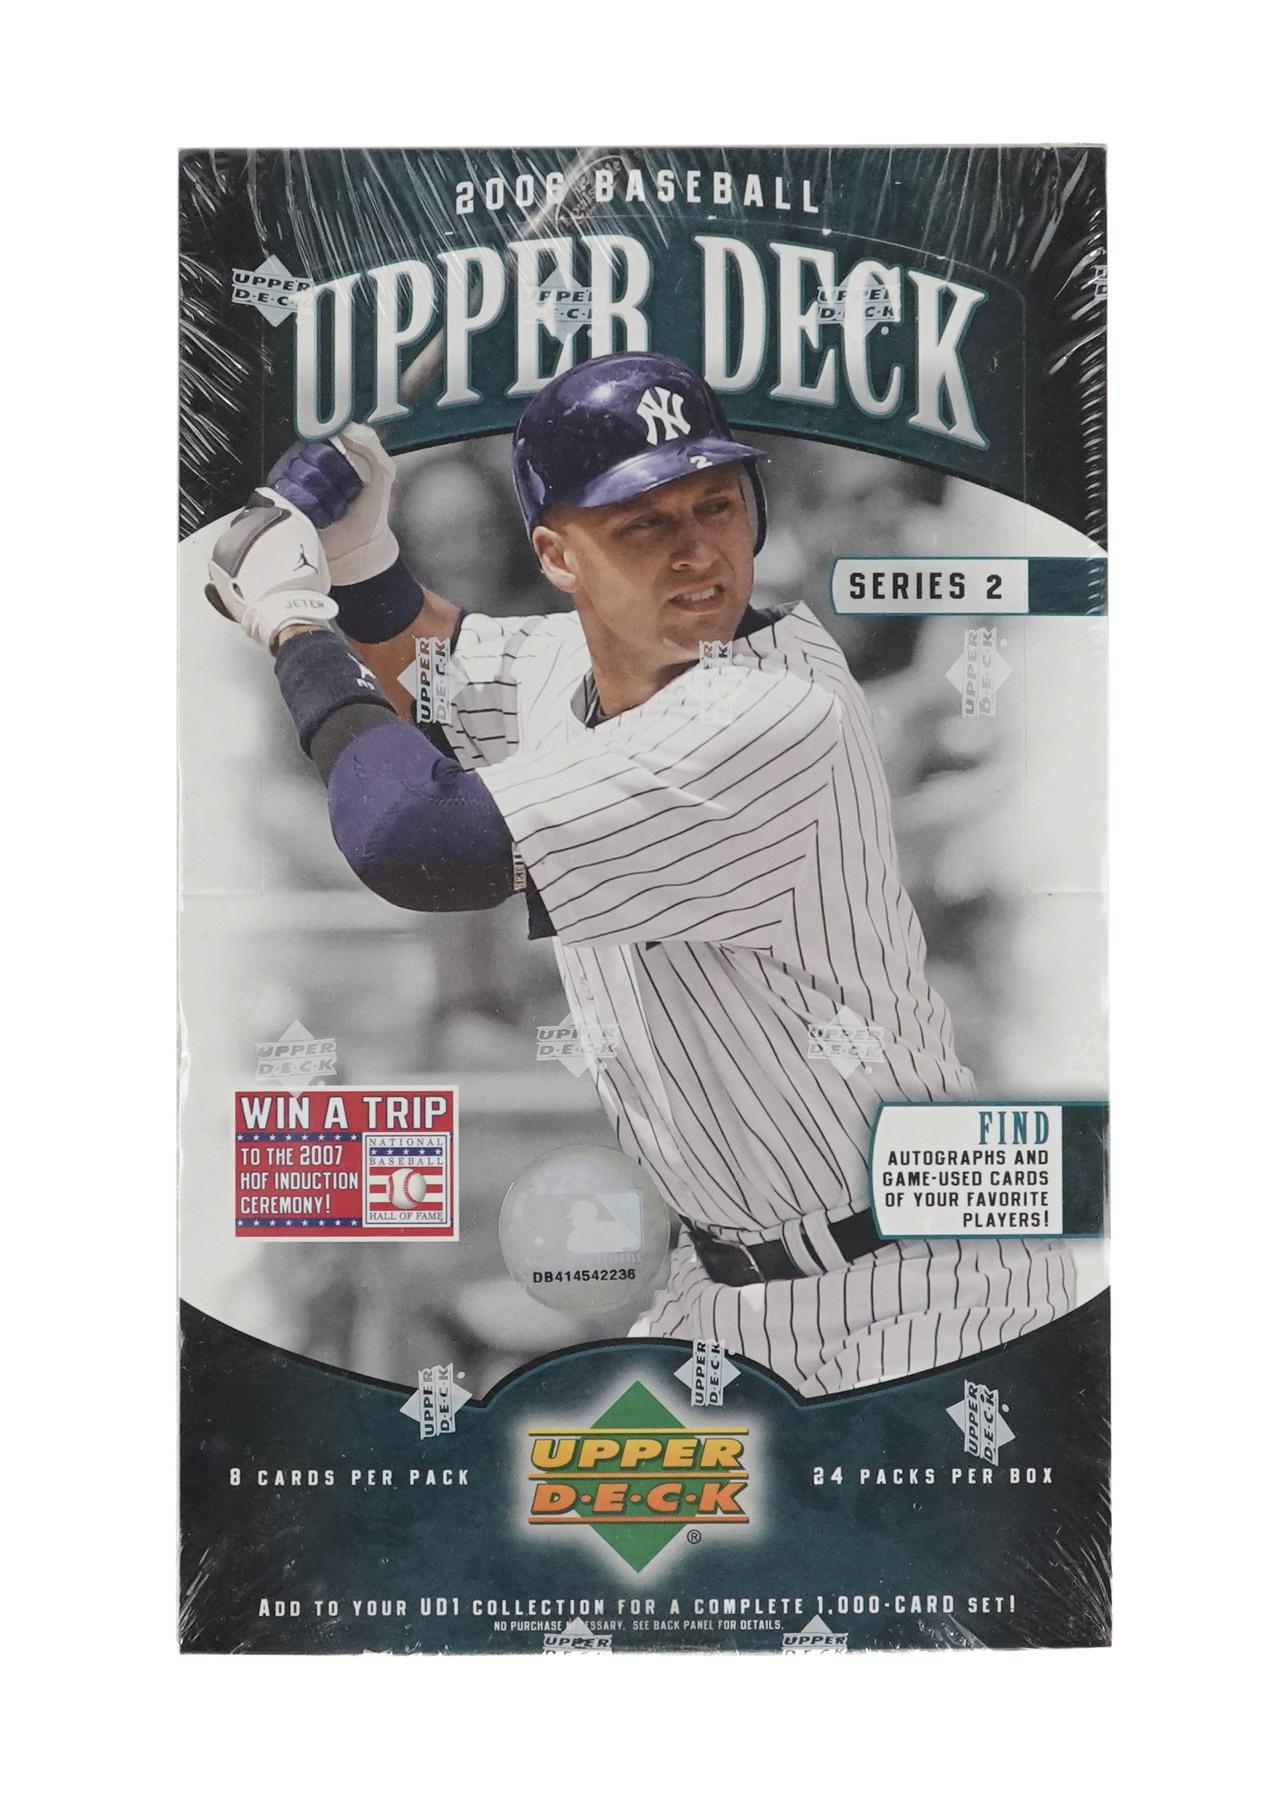 Is Your Sports Card Game Worn or Player Worn? How Can You Tell? 